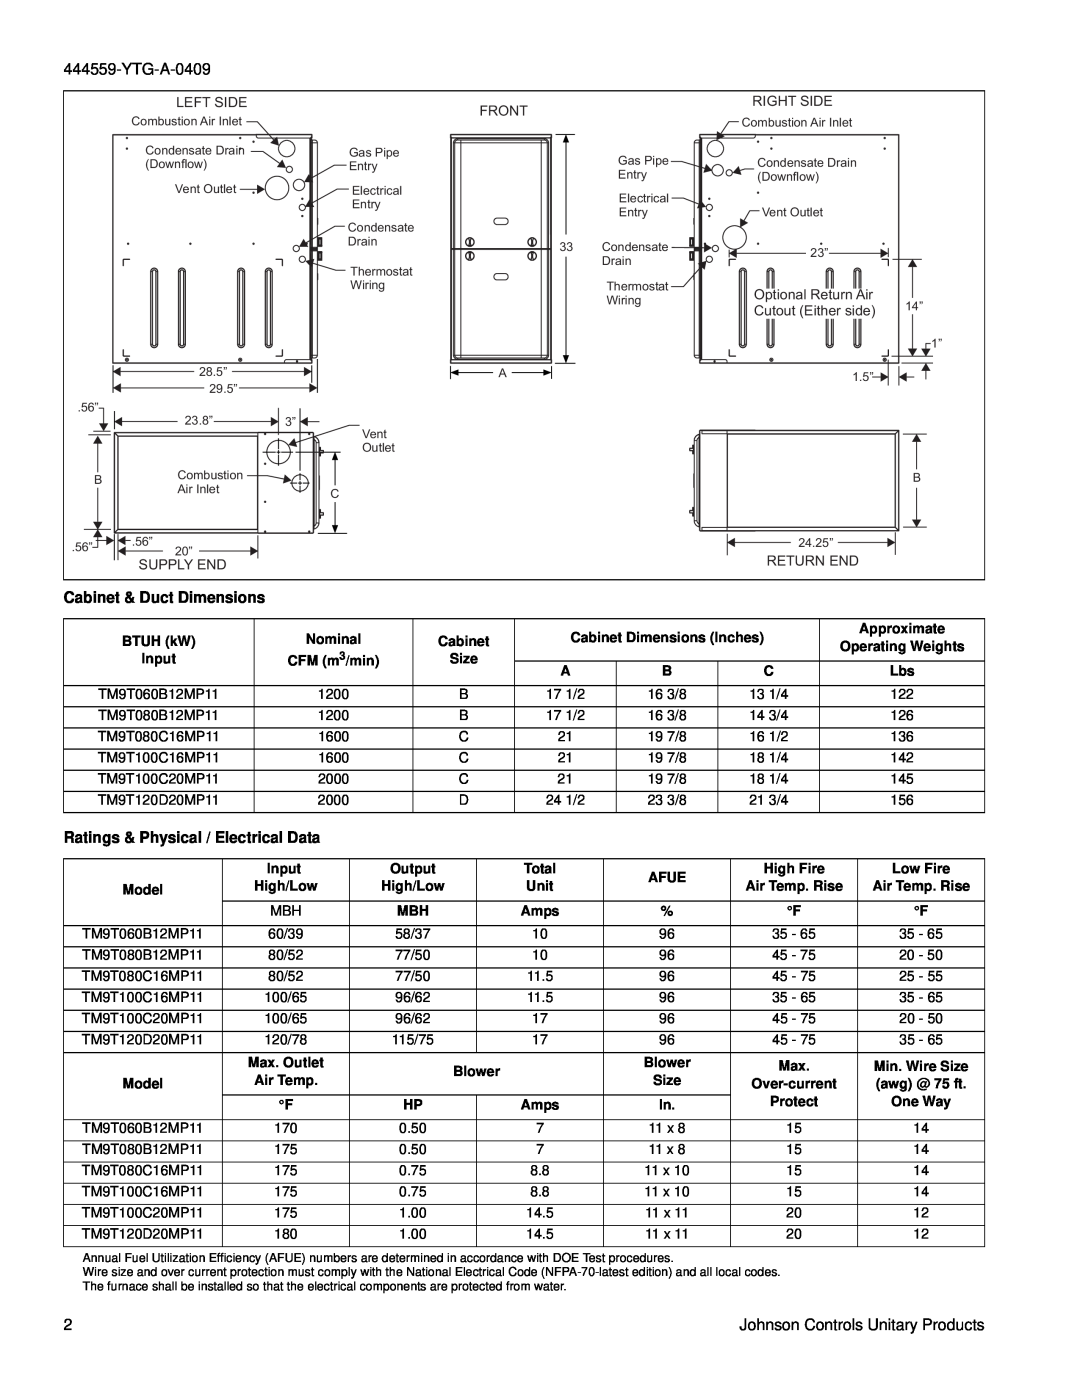 York TM9T Cabinet & Duct Dimensions, Ratings & Physical / Electrical Data, Left Side, Front, Right Side, Supply End 